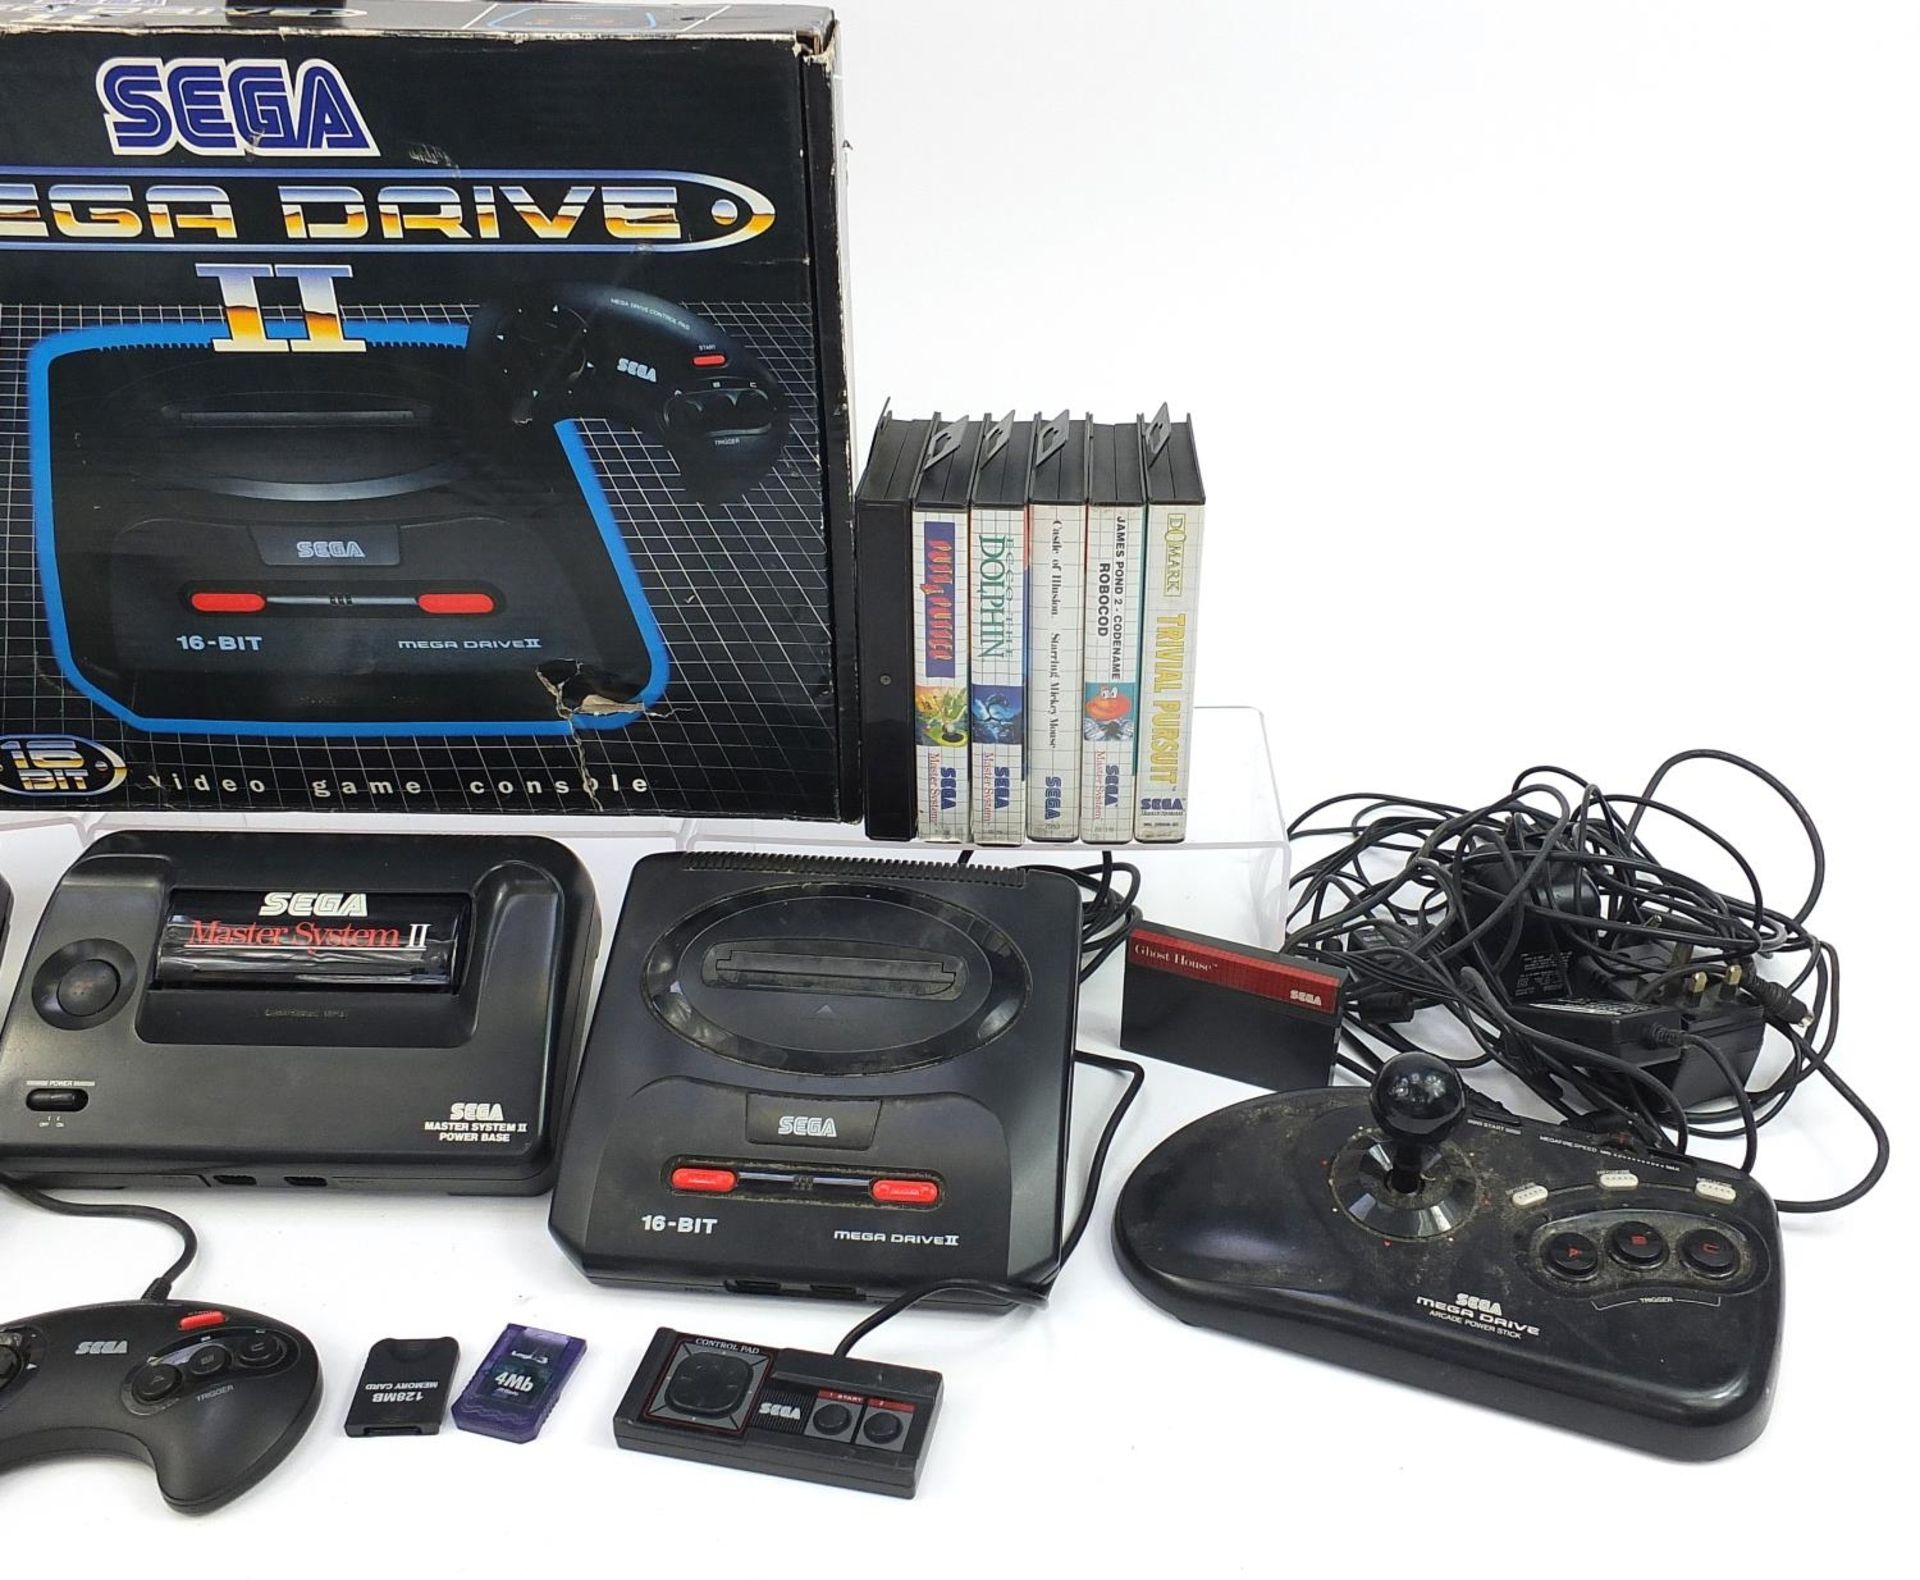 Two Sega Mega Drive II games consoles and a Sega Master System II powerbase with accessories and a - Image 3 of 3